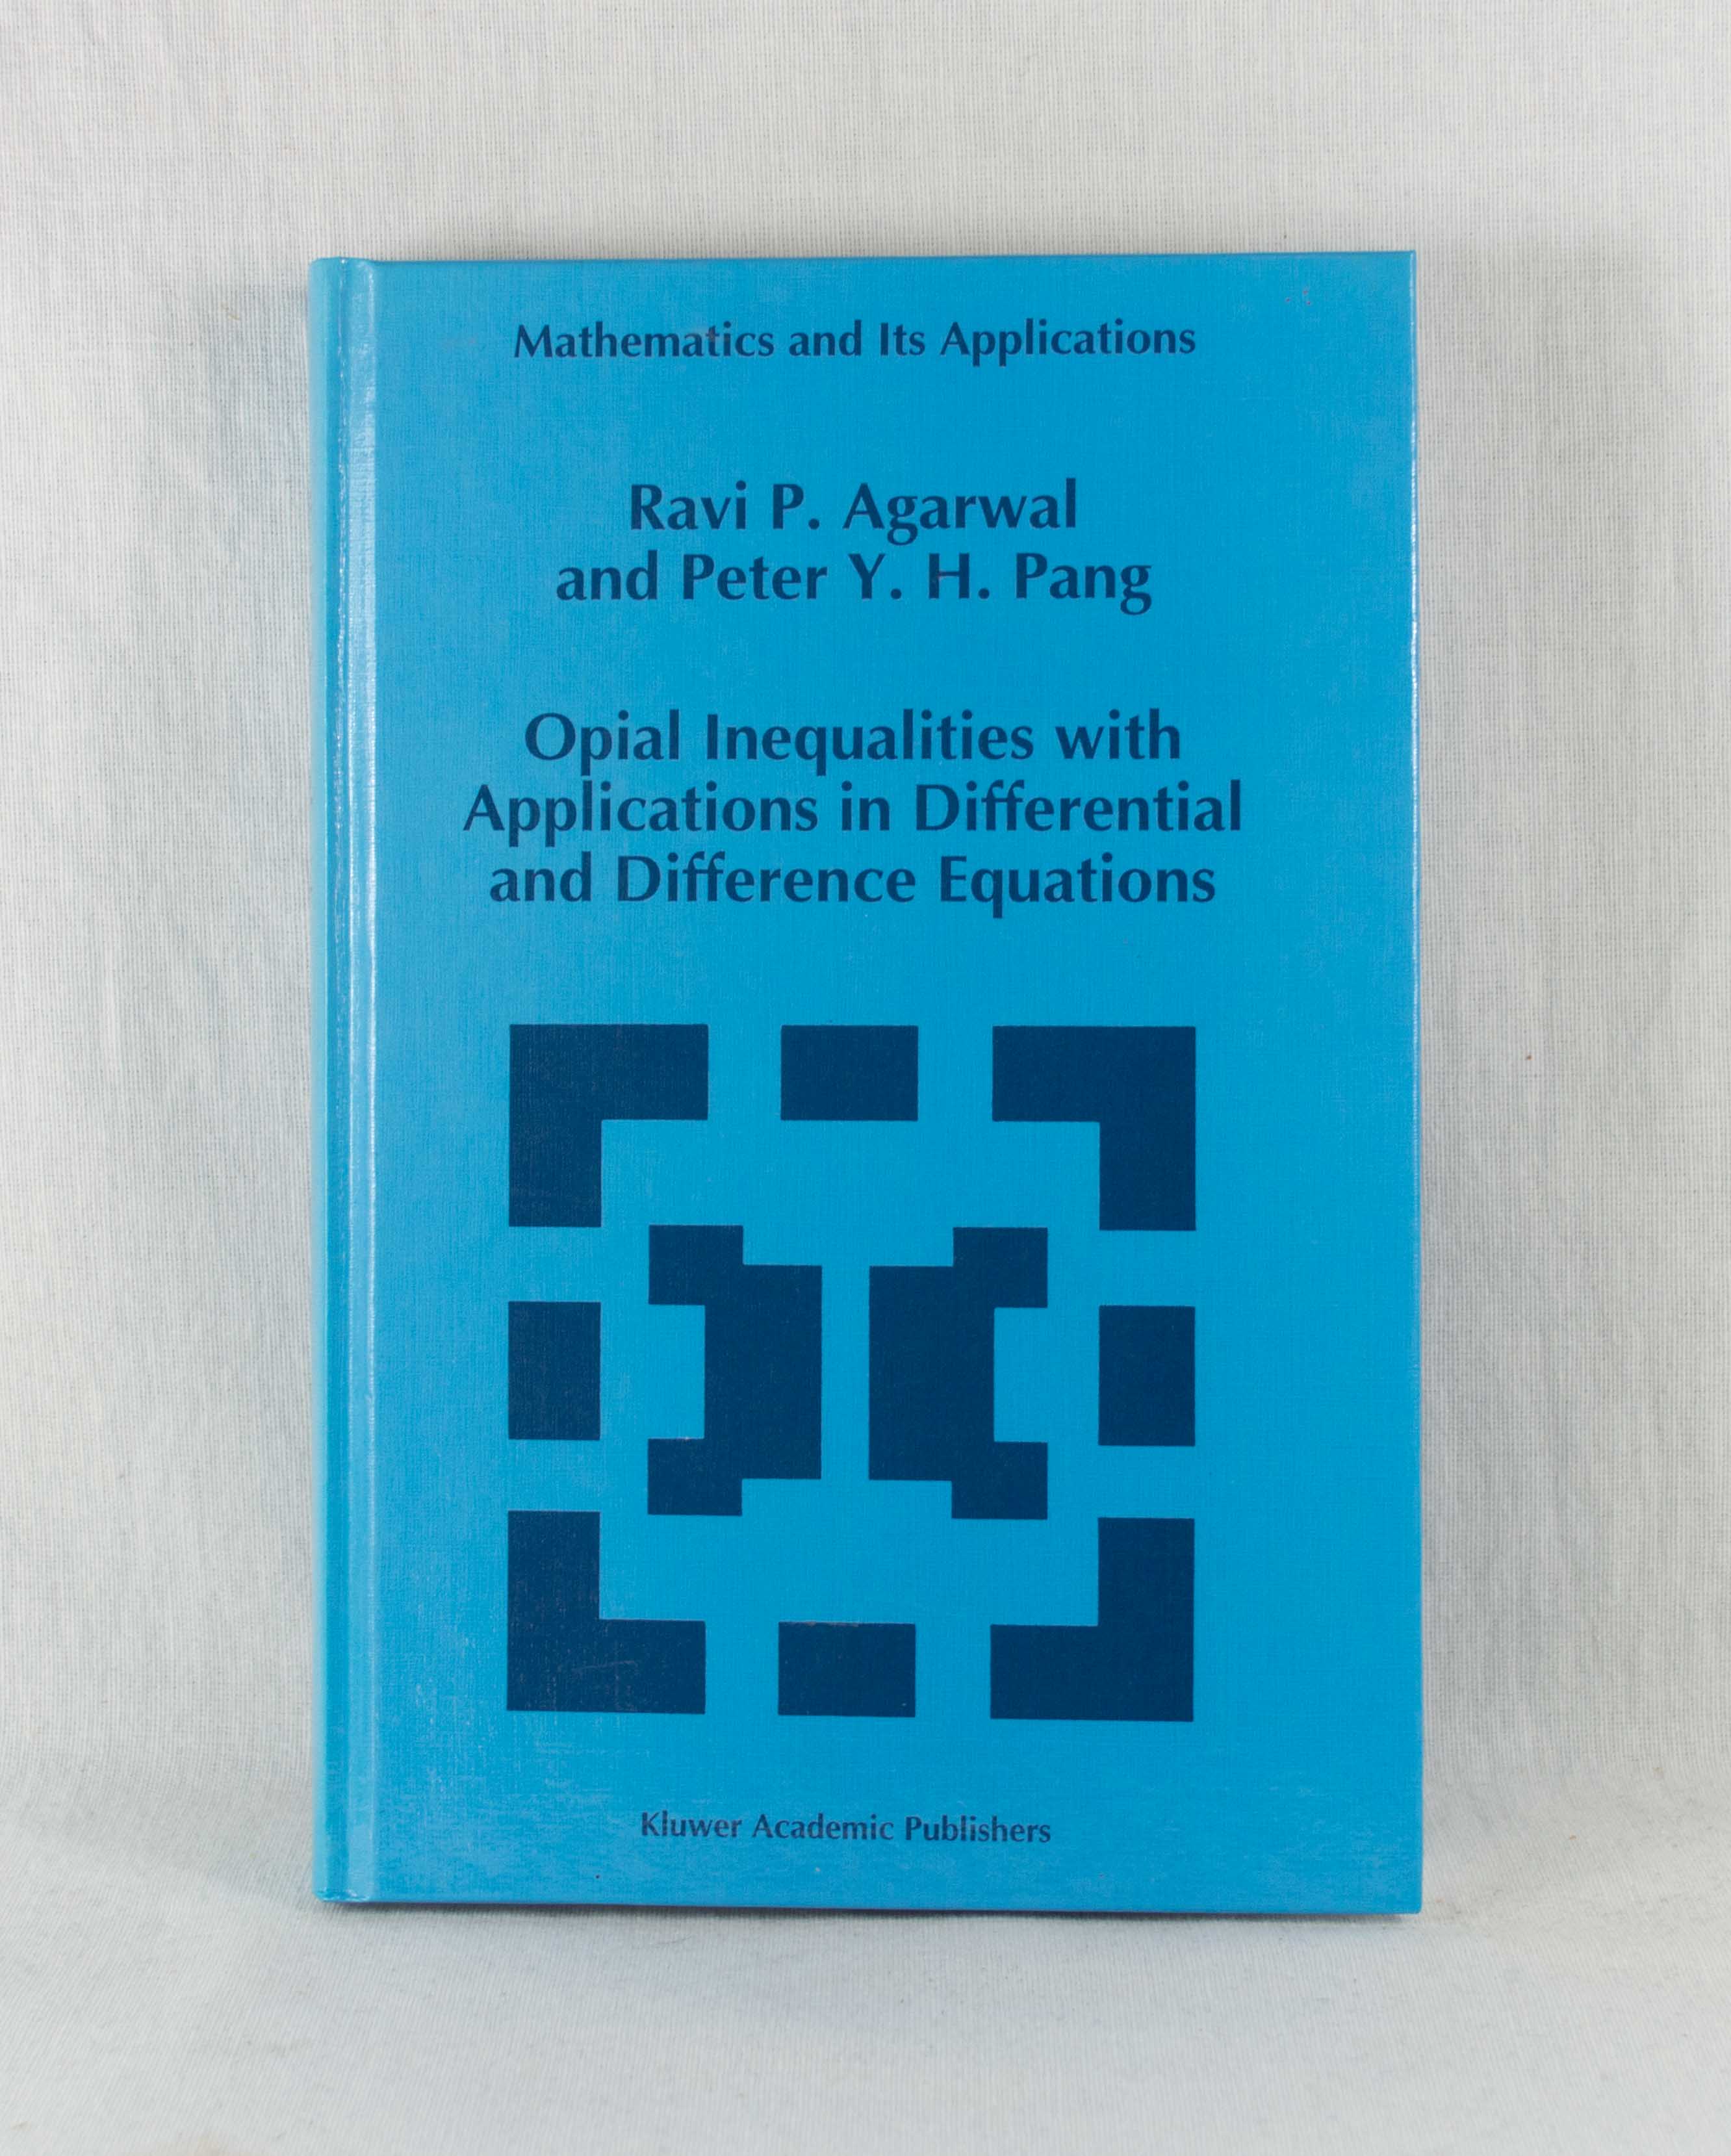 Opial Inequalities with Applications in Differential and Difference Equations. (= Mathematics an Its Applications, Vol. 320). - Agarwal, Ravi P. and Peter Y. H. Pang